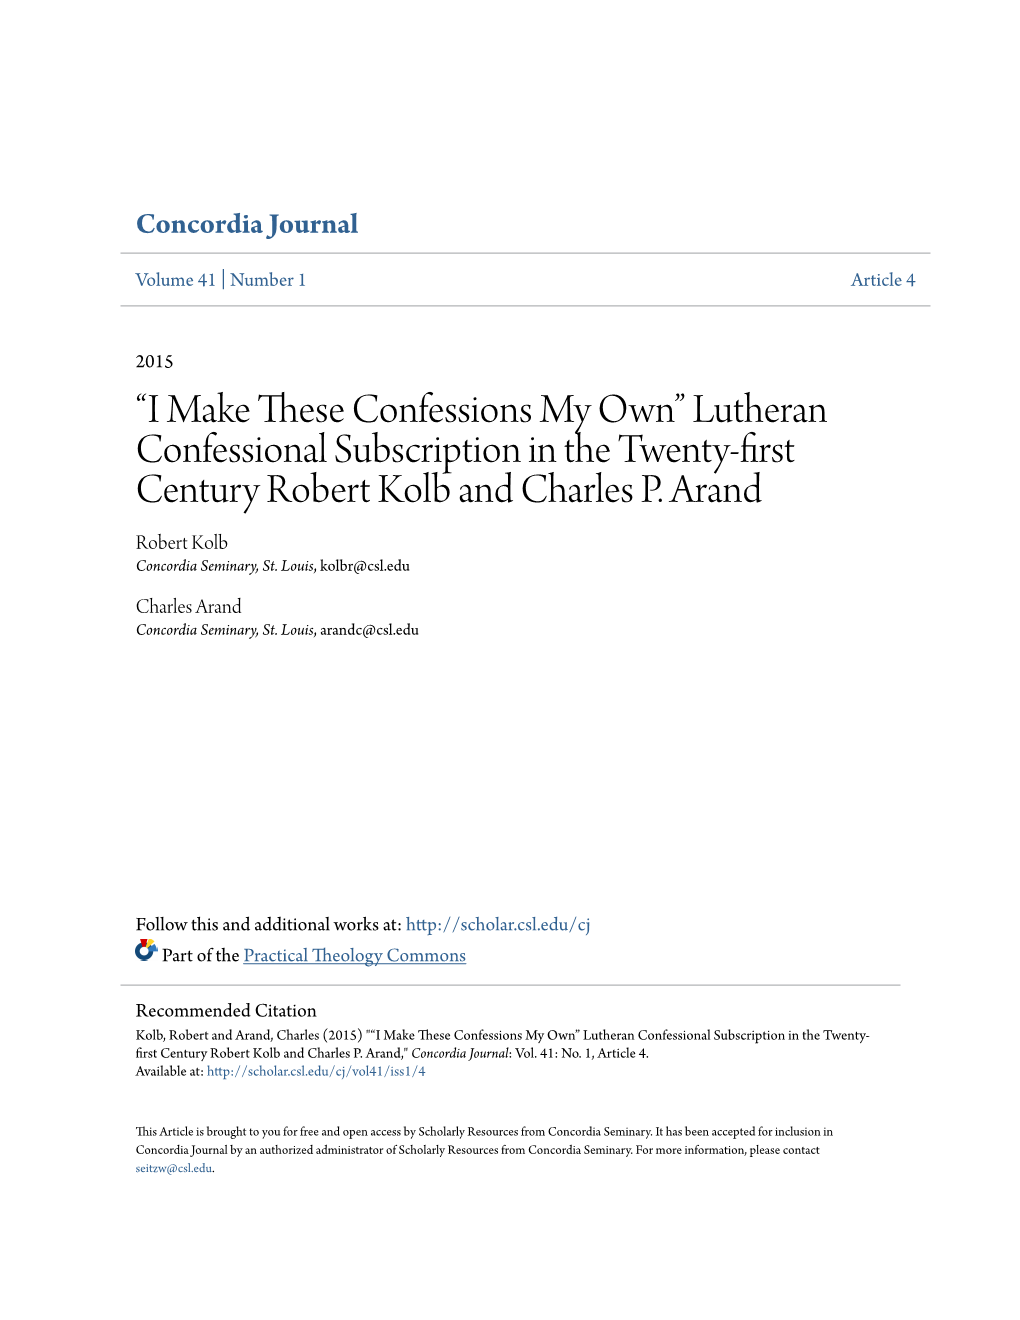 I Make These Confessions My Own” Lutheran Confessional Subscription in the Twenty- First Century Robert Kolb and Charles P